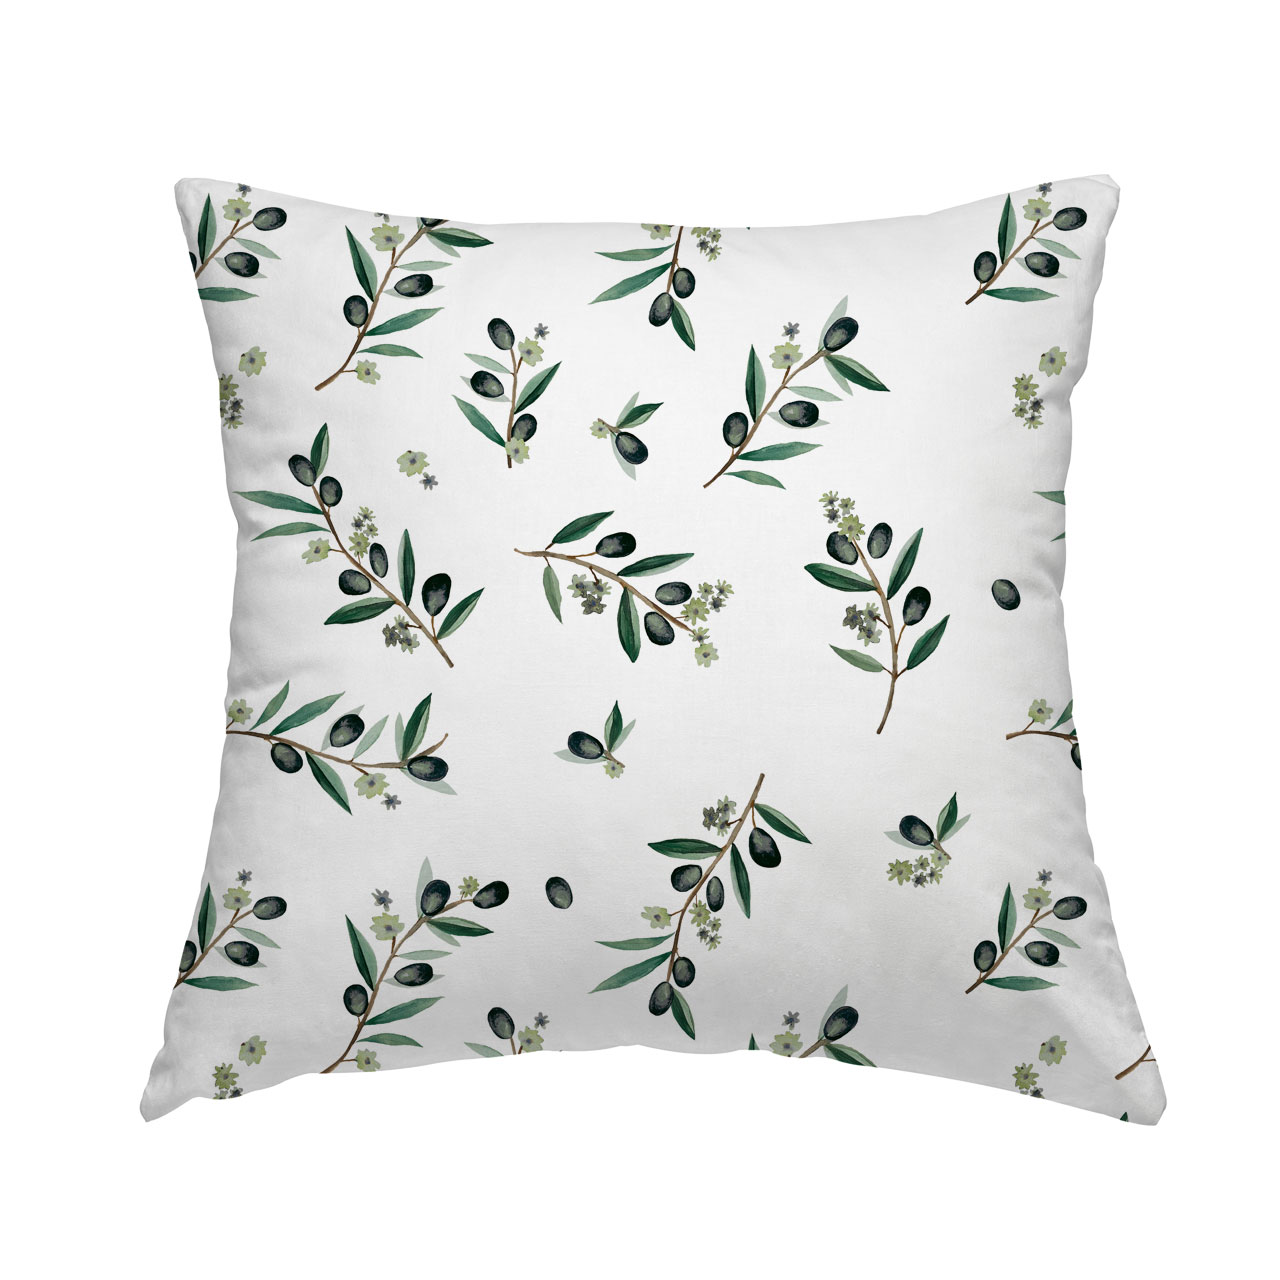 Olives-Branches-Leaves-EVOO-Pillow